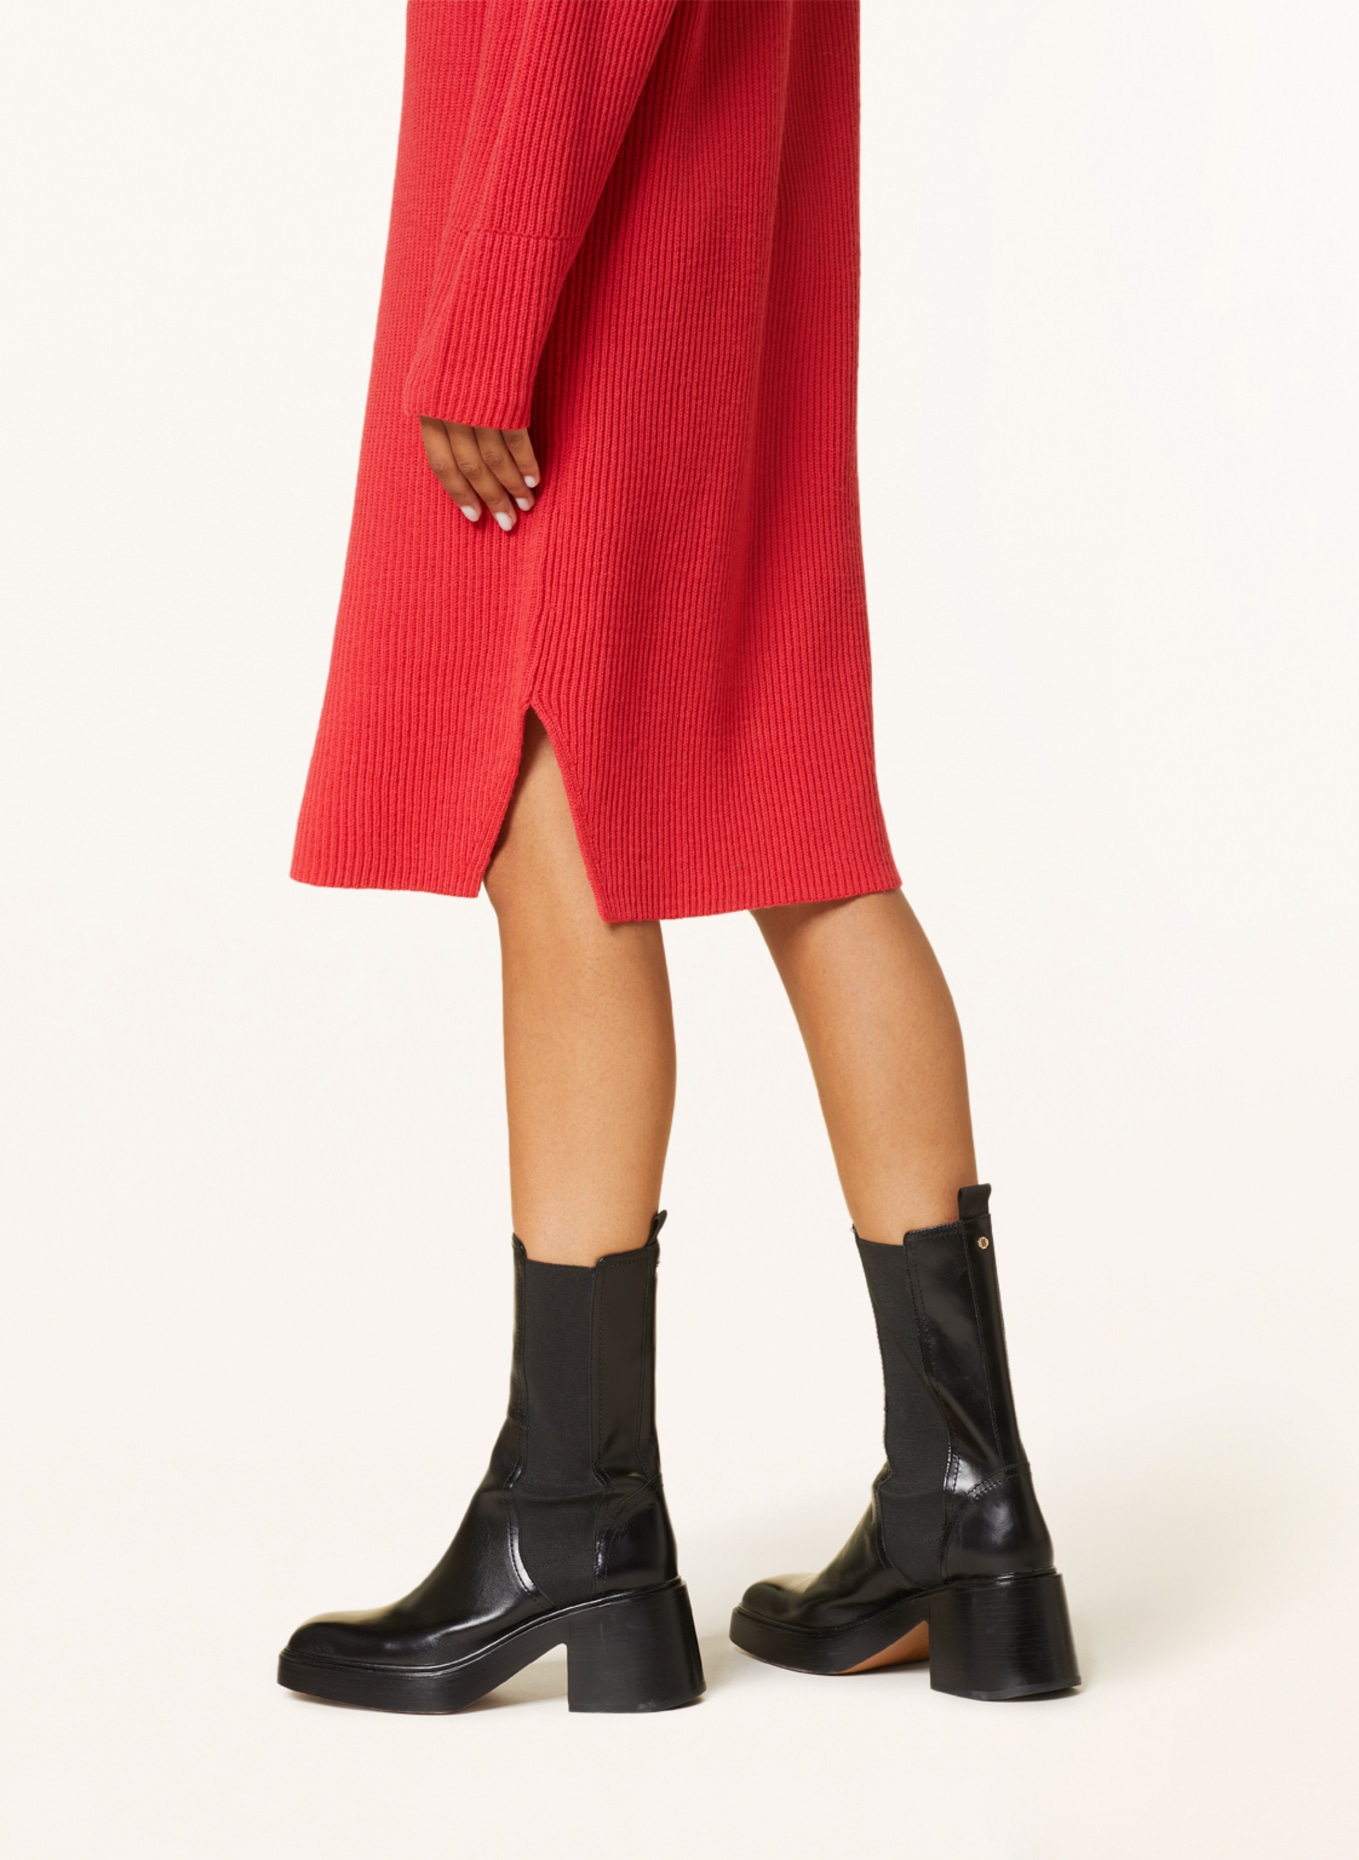 LUISA CERANO Knit dress, Color: RED (Image 4)